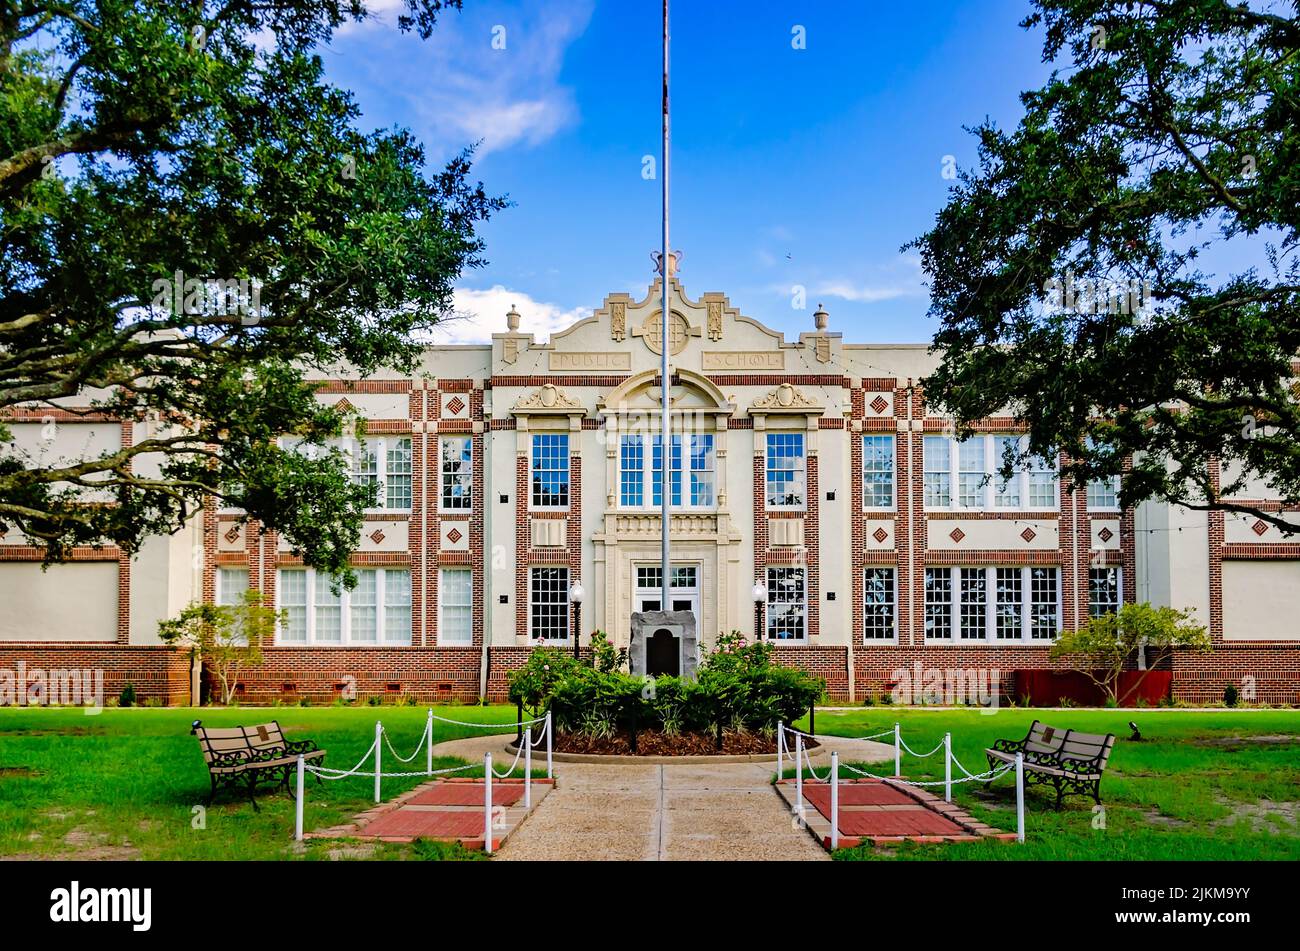 The Mary C. O’Keefe Cultural Arts Center is pictured, July 31, 2022, in Ocean Springs, Mississippi. The arts center was built in 1927. Stock Photo